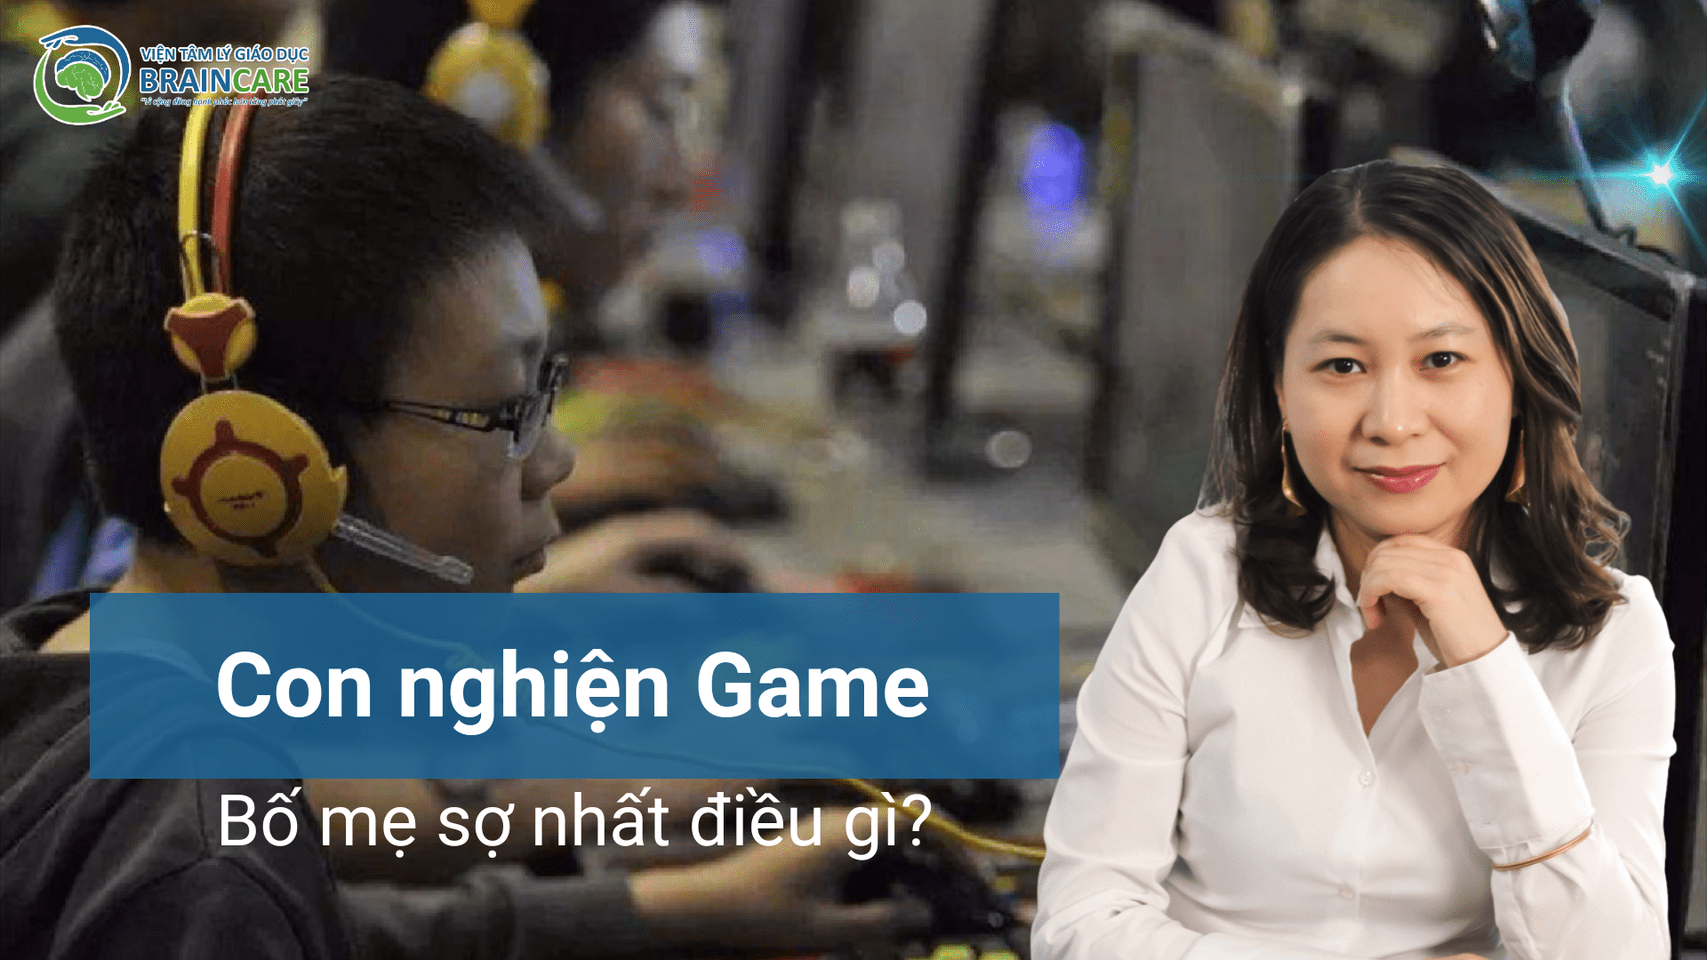 nghien-game-can-lam-gi